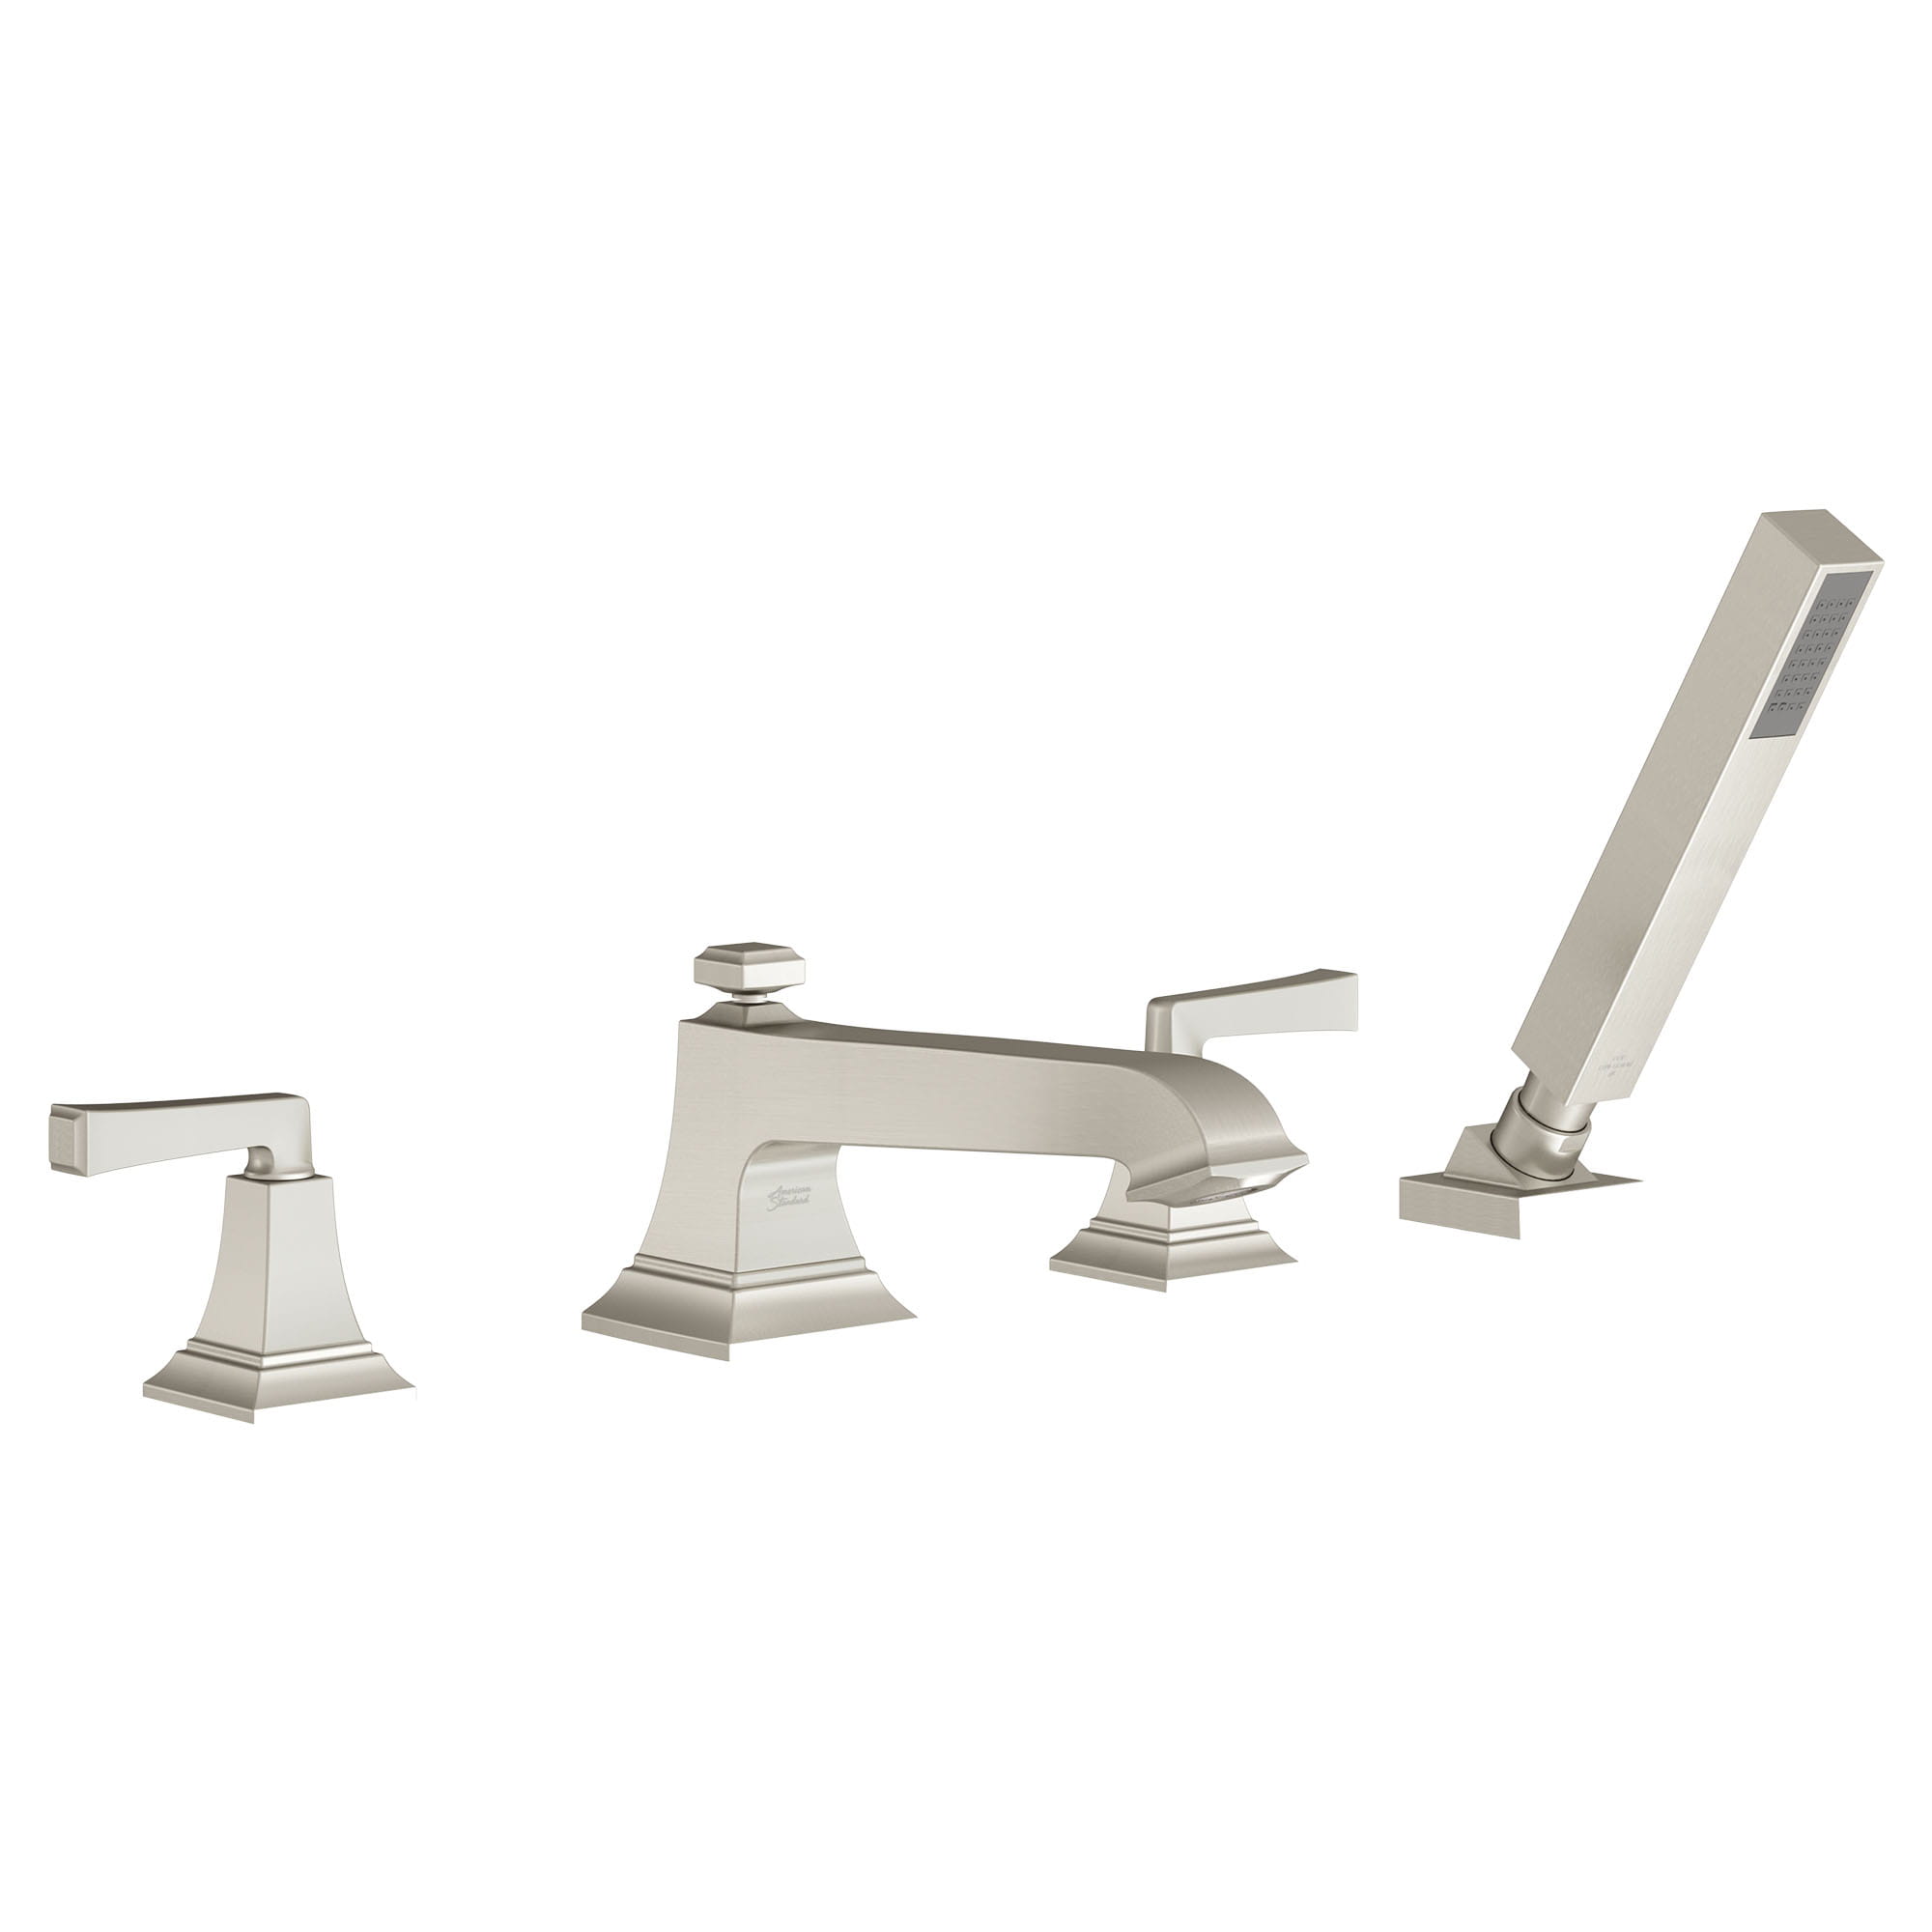 Town Square S Bathub Faucet With Lever Handles and Personal Shower for Flash Rough in Valve   BRUSHED NICKEL